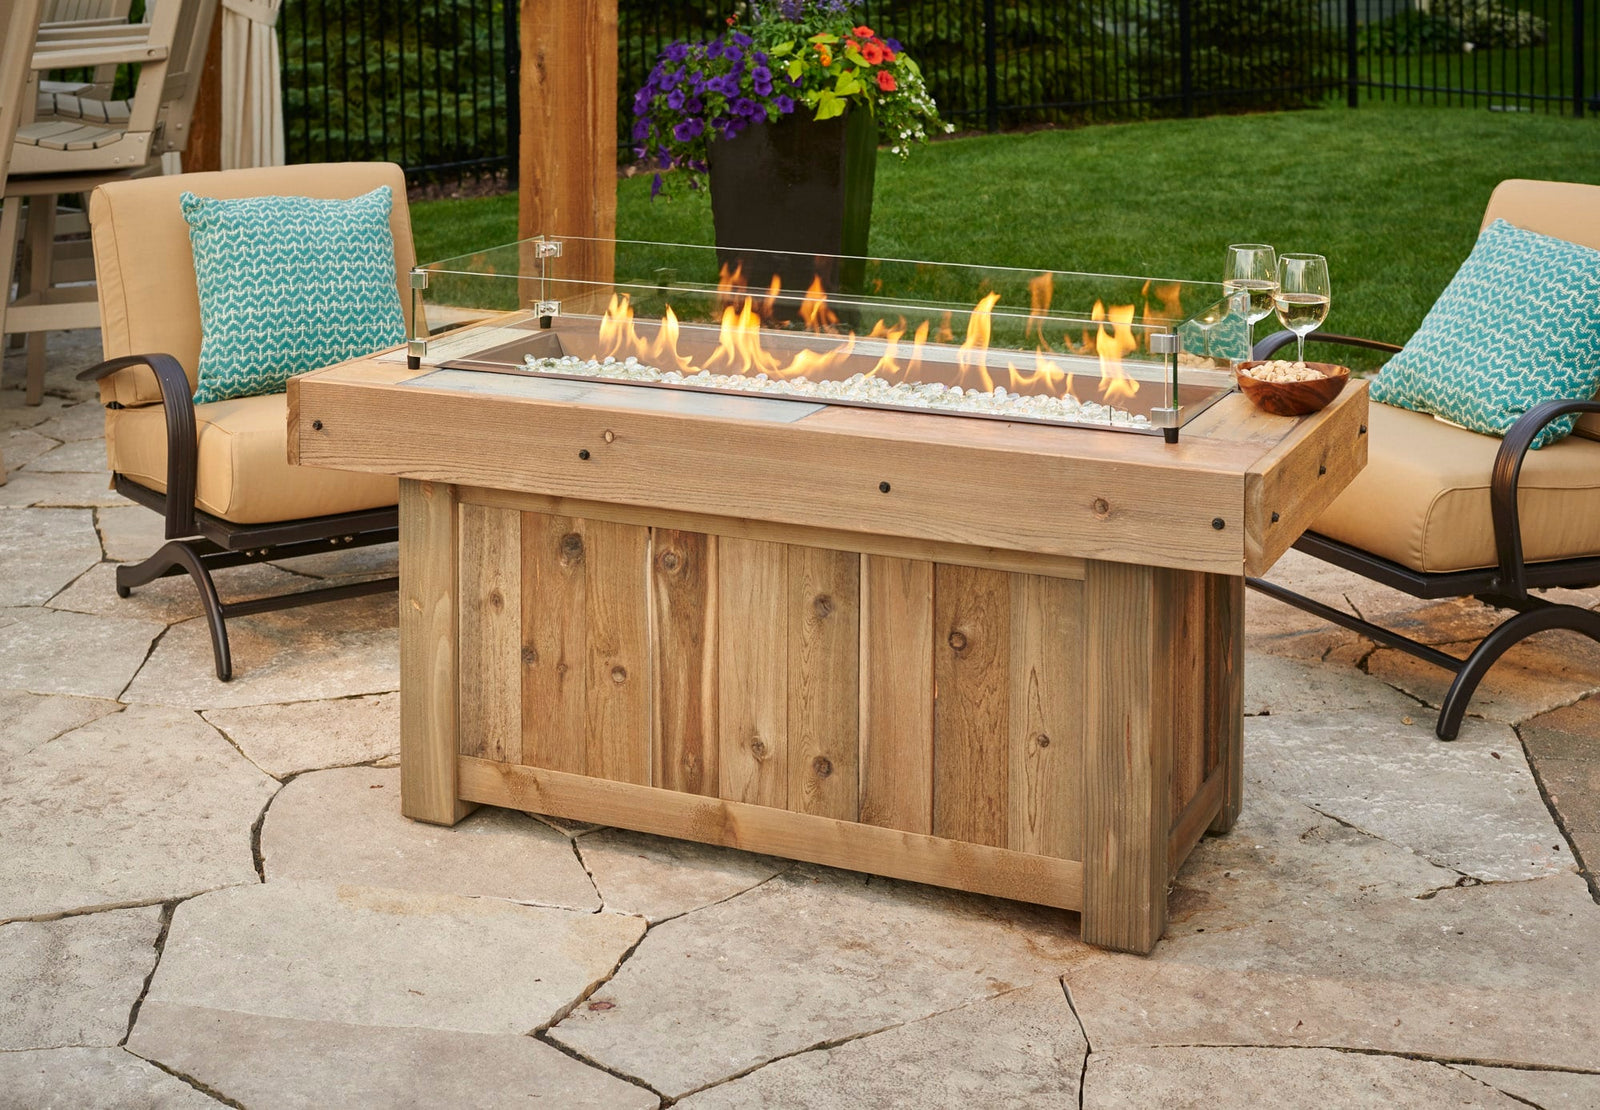 Should I Choose a Gas Fireplace or Fire Pit For My Outdoor Room?